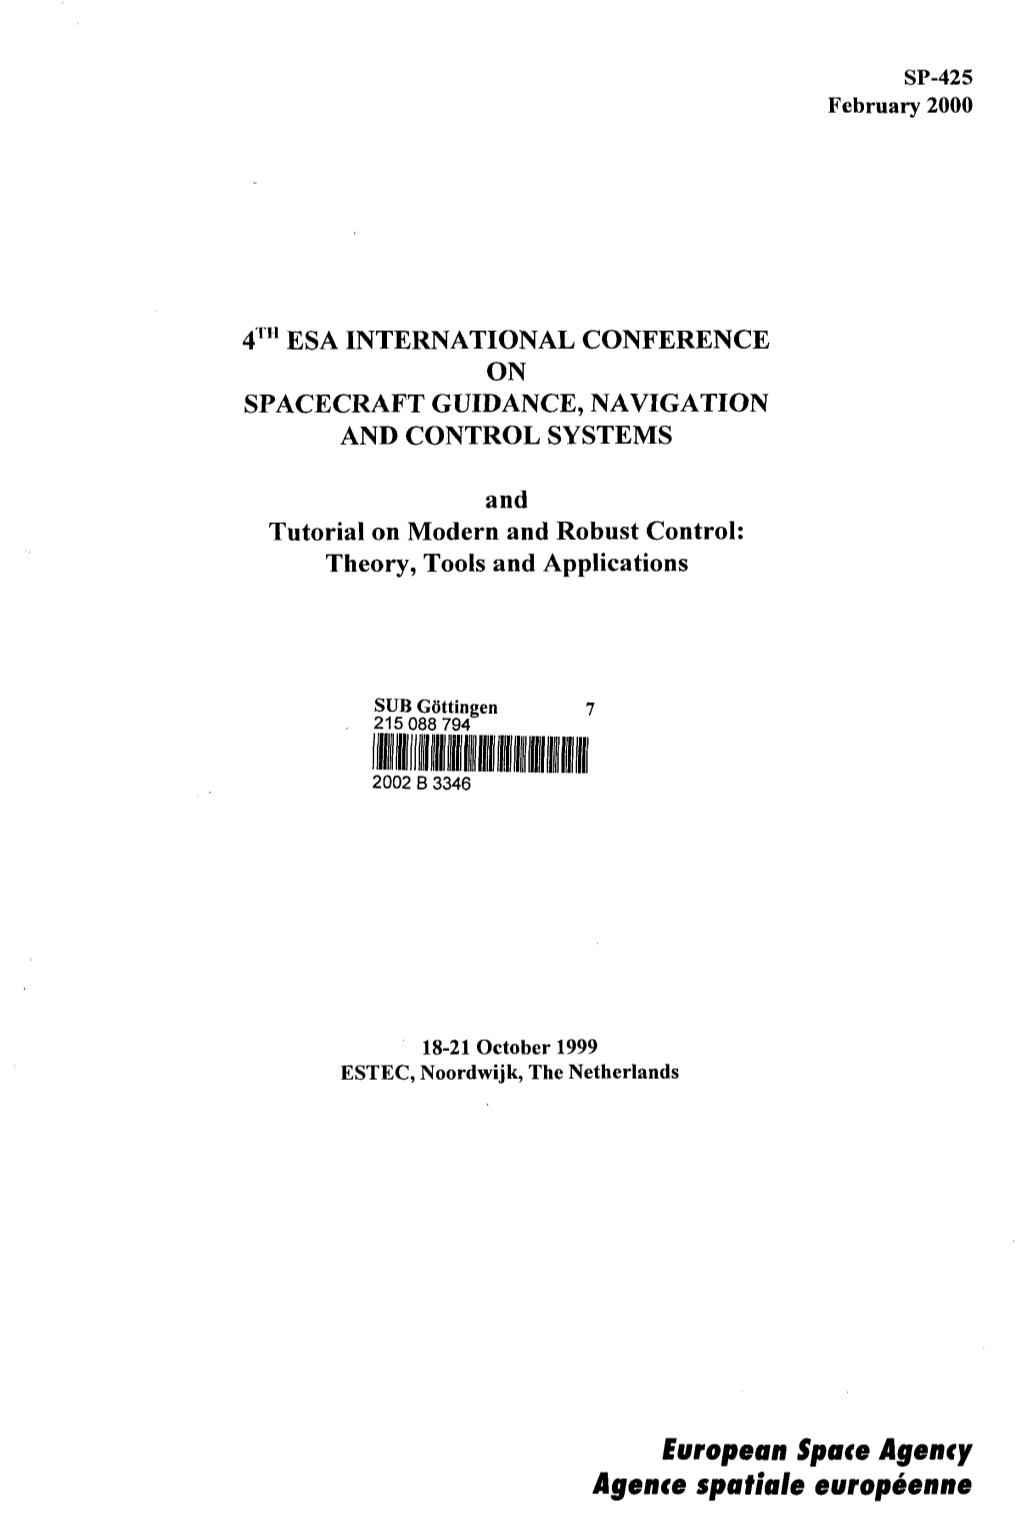 4TH ESA INTERNATIONAL CONFERENCE on SPACECRAFT GUIDANCE, NAVIGATION and CONTROL SYSTEMS and Tutorial on Modern and Robust Contro